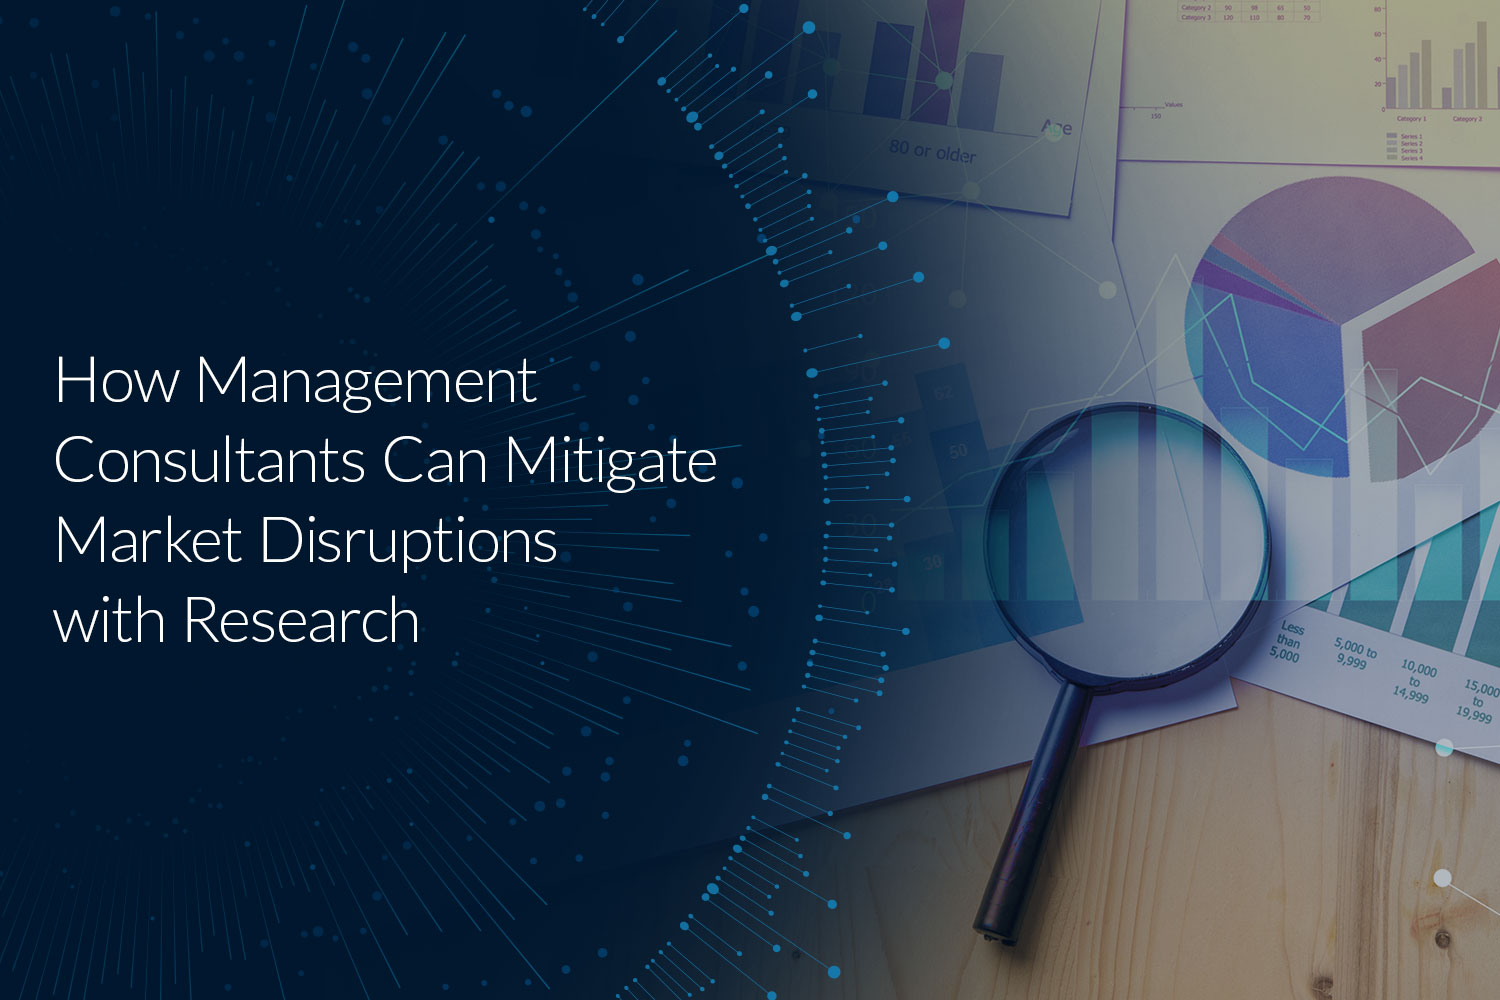 How Management Consultants Can Mitigate Market Disruptions with Research